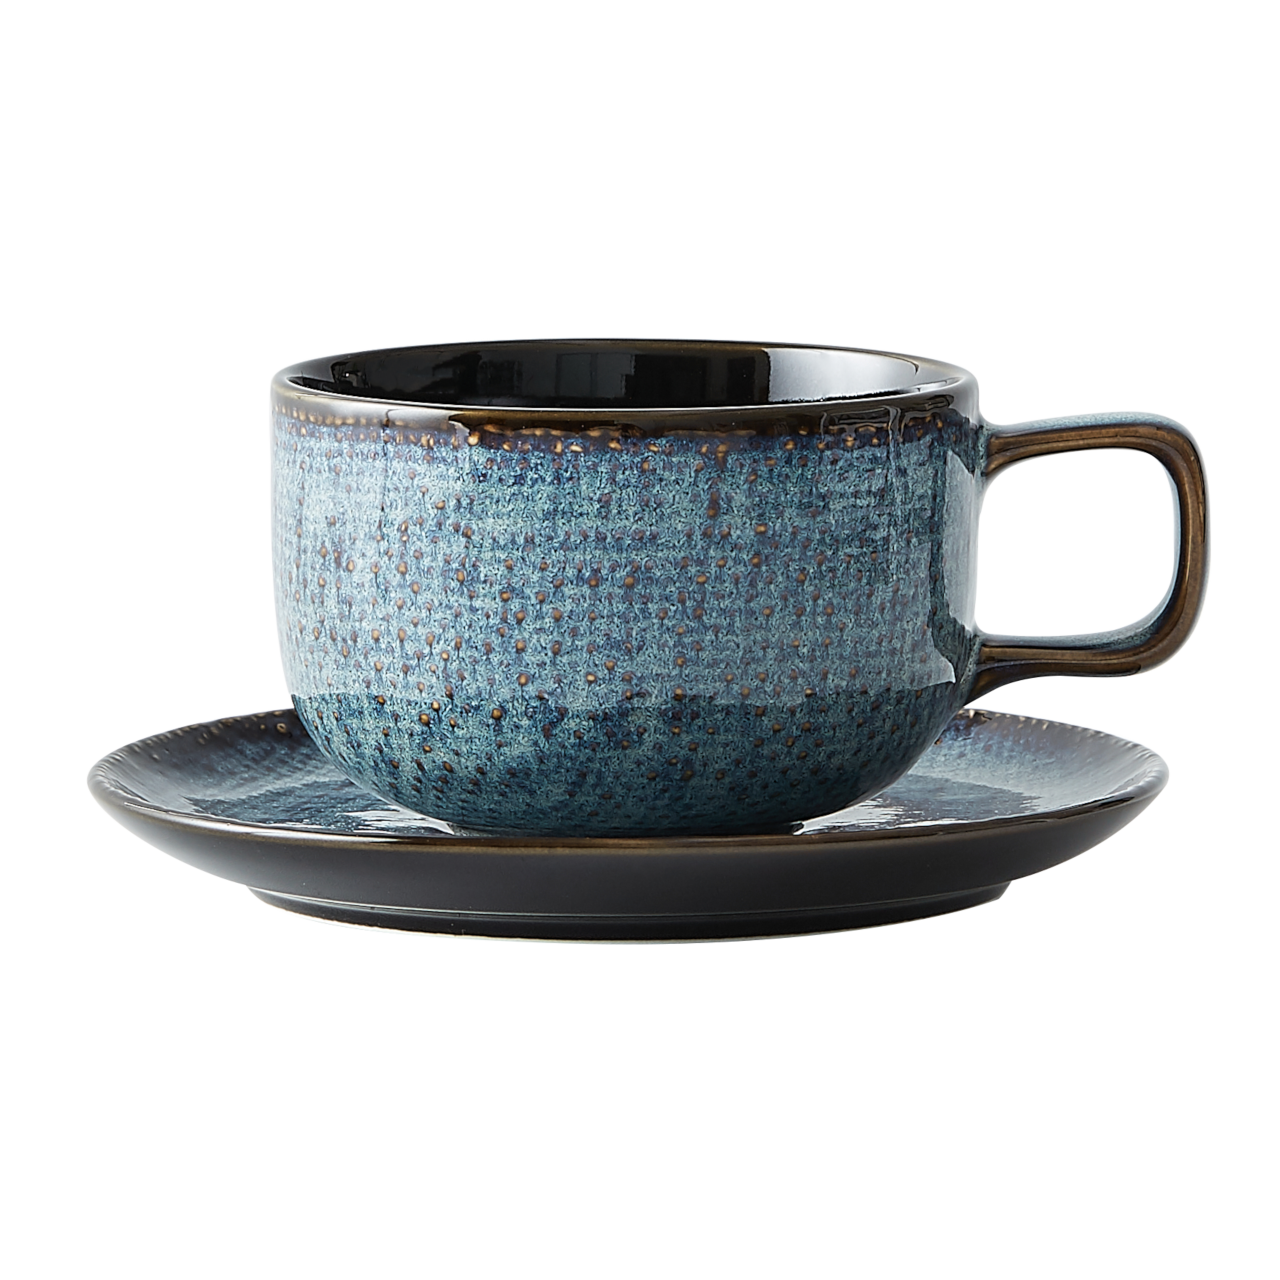 Knit - Cup & Saucer